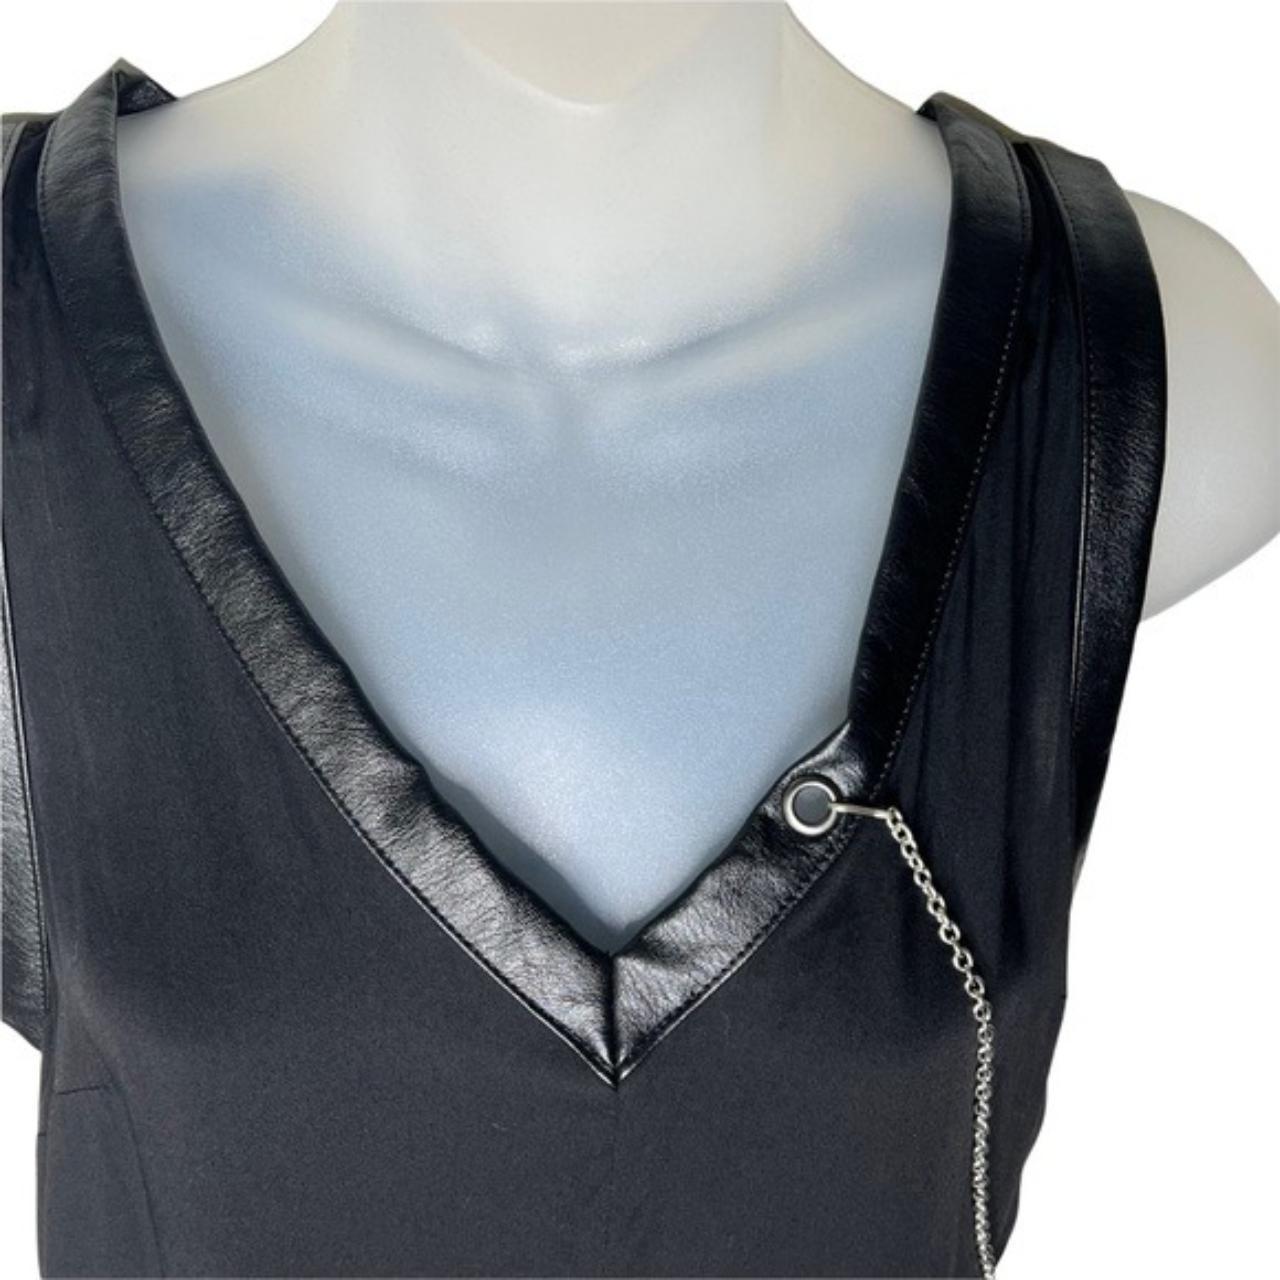 Product Image 3 - Disturbia 
Black top with chain